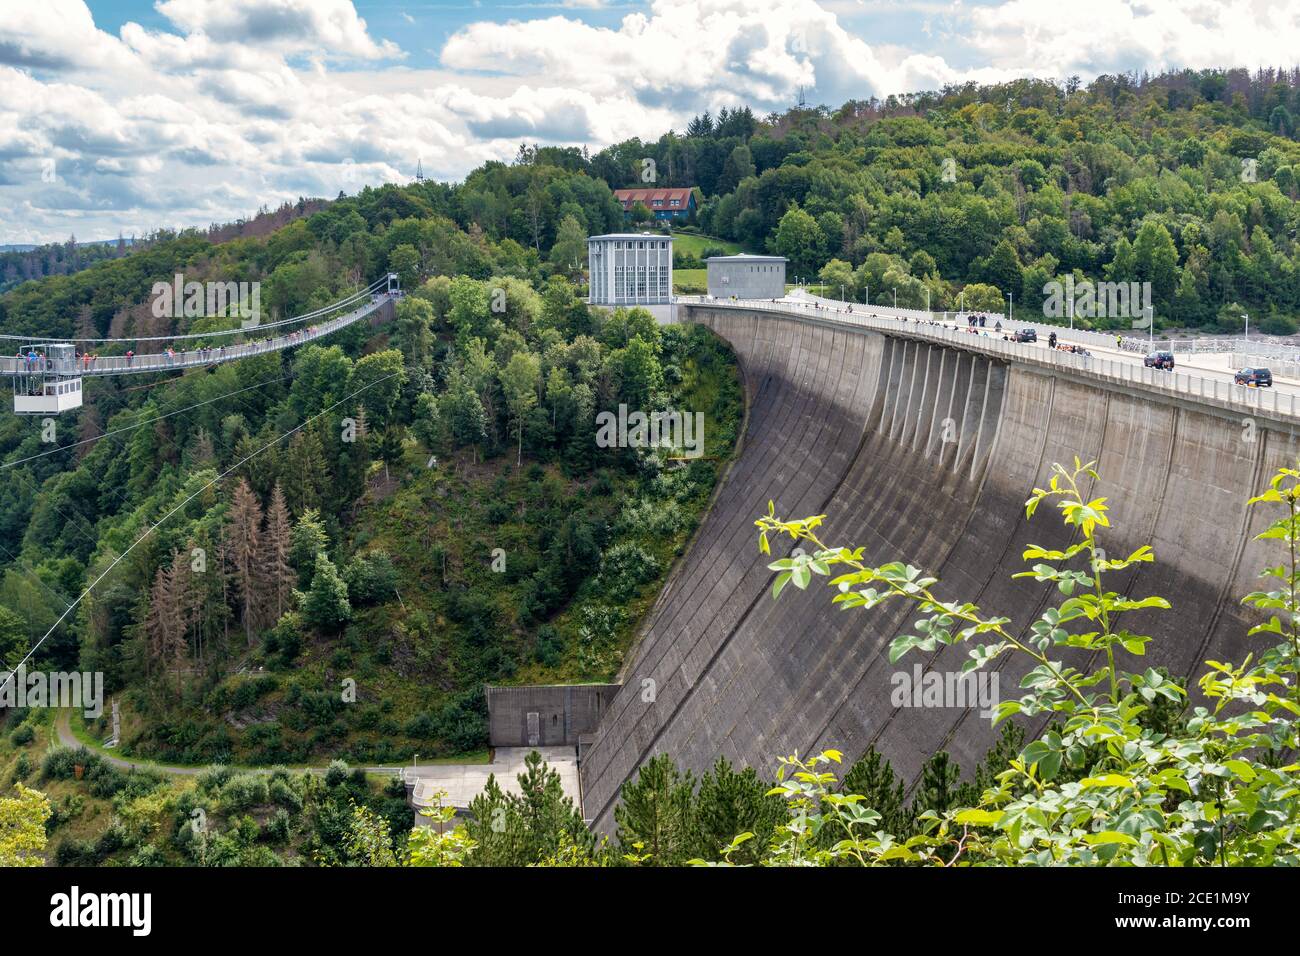 Oberharz am Brocken, GERMANY - August 29.2020: The Rappbode Dam is the largest dam in the Harz region as well as the highest dam in Germany. Stock Photo